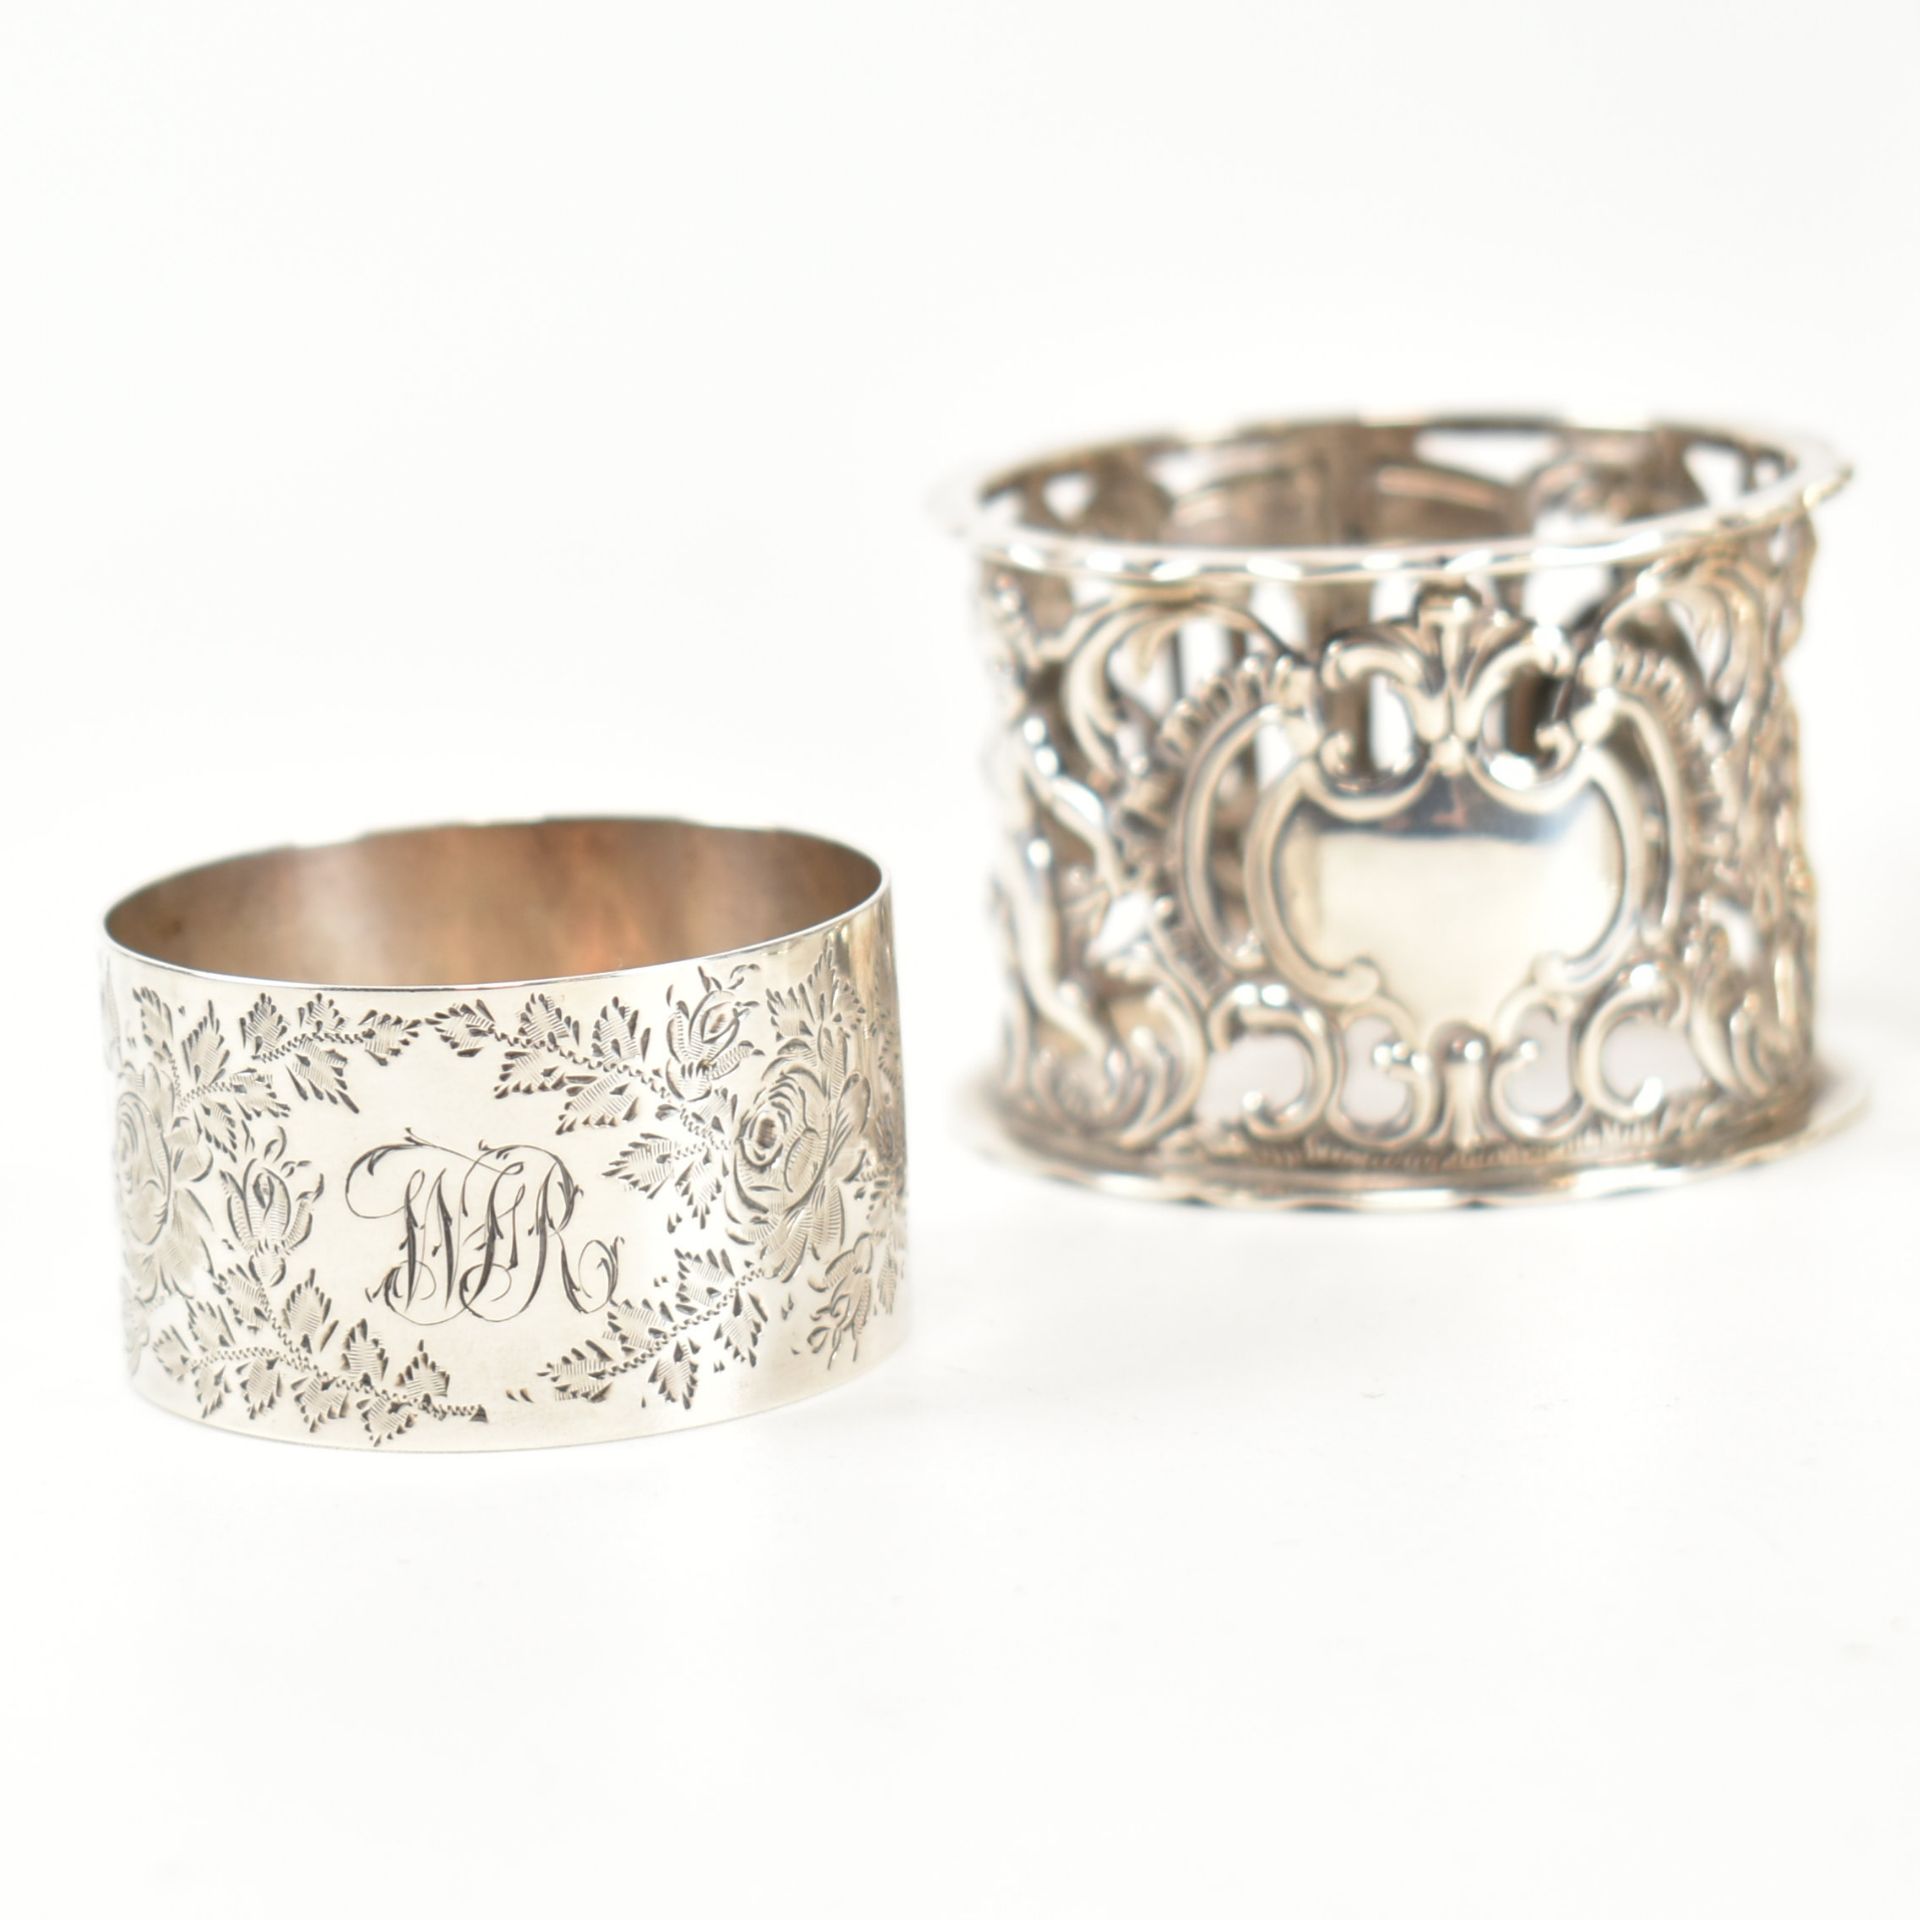 VICTORIAN & LATER HALLMARKED SILVER ITEMS CUP & NAPKIN RINGS - Image 2 of 8